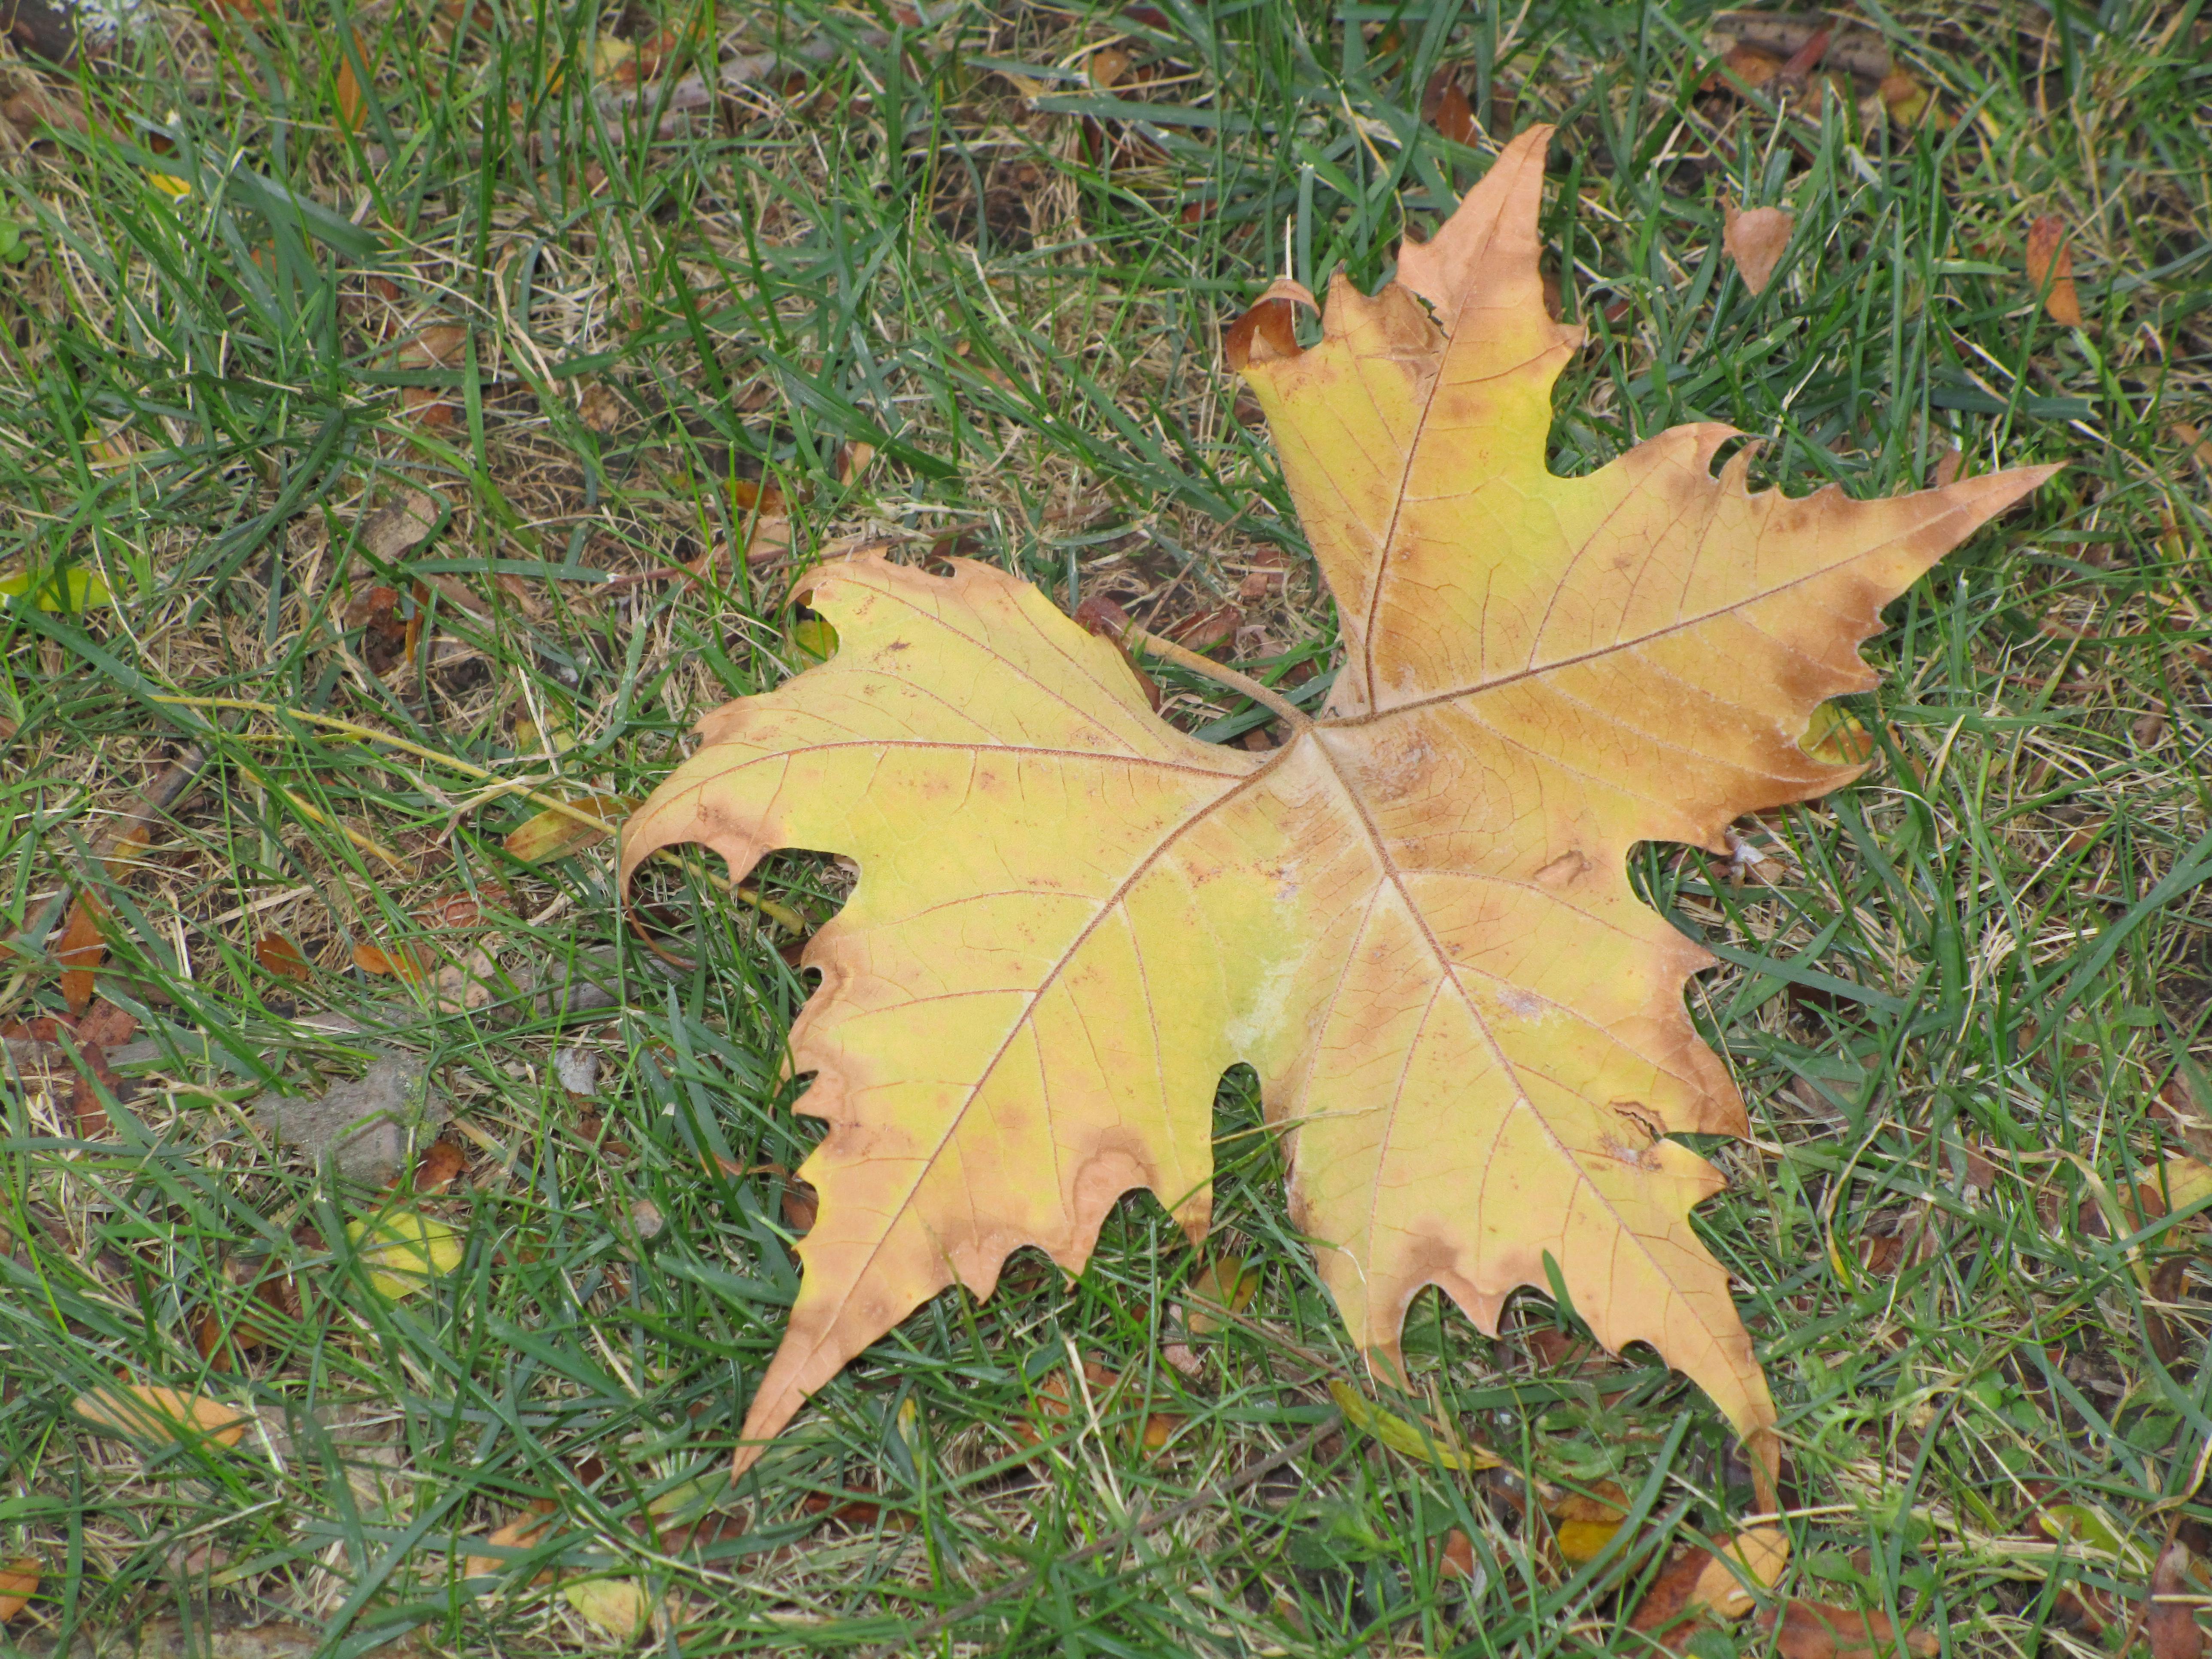 Free stock photo of sycamore leaf on green grass lawn USA